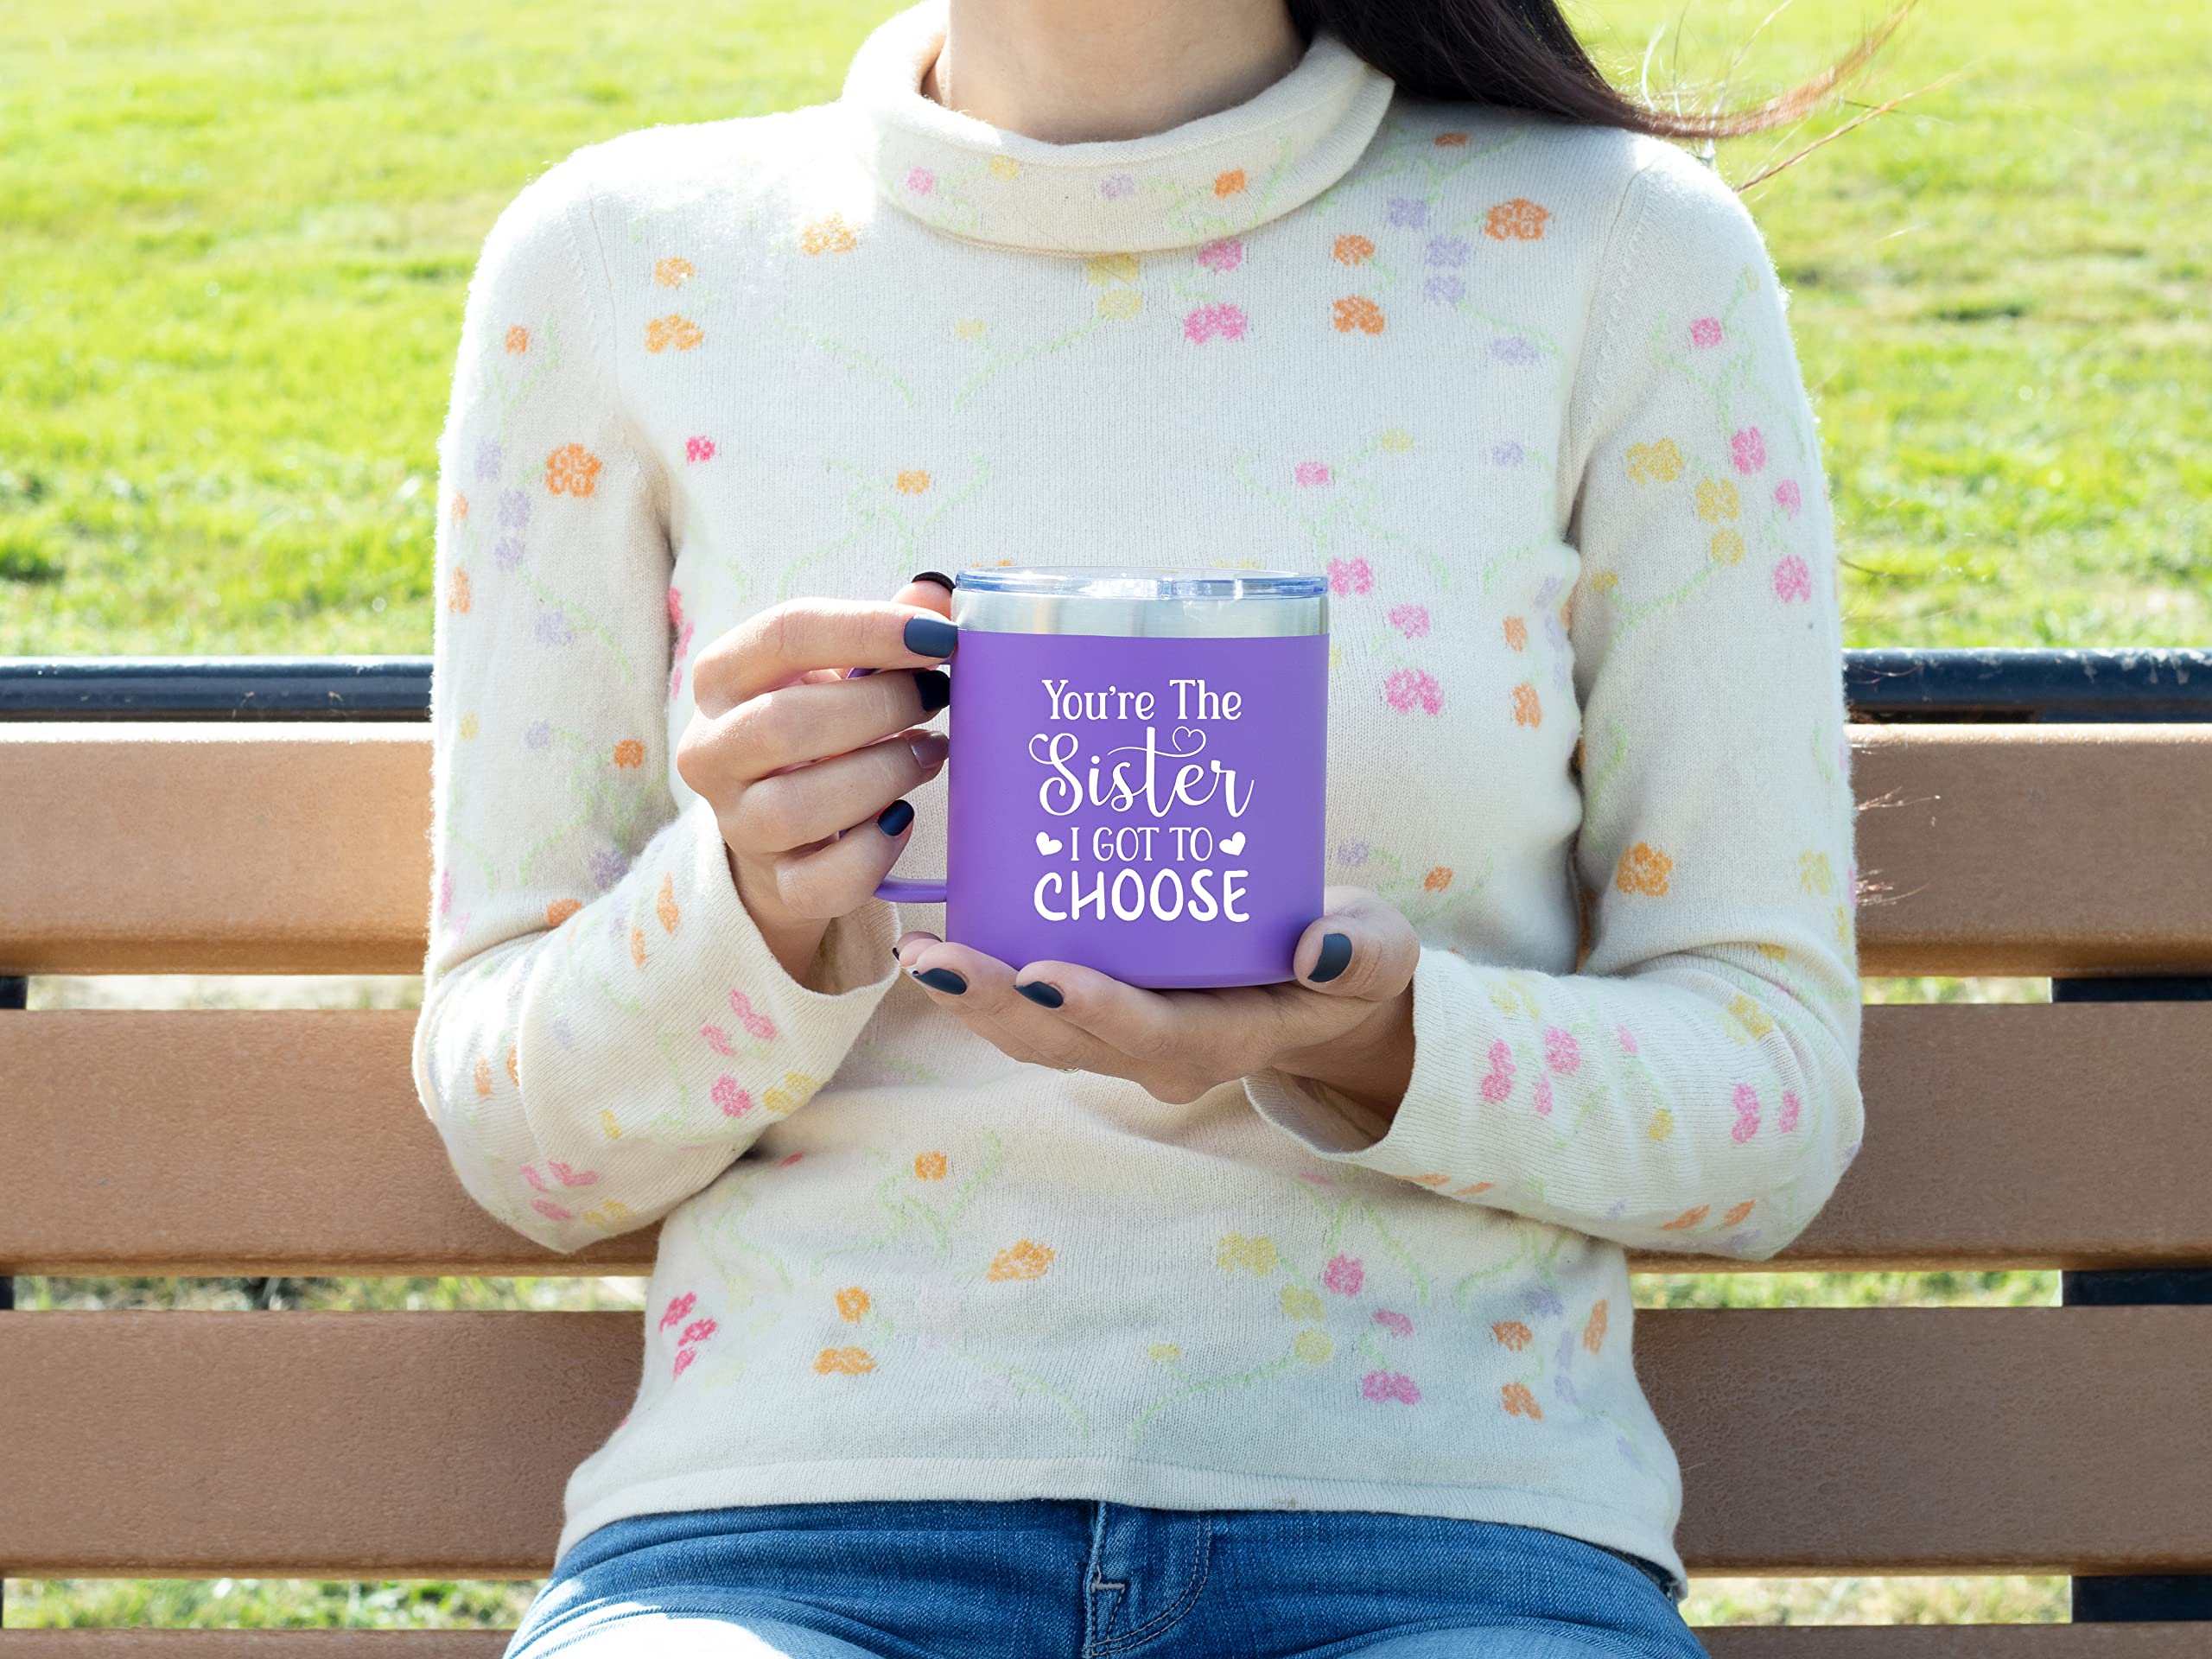 KLUBI Gifts for Best Friend – “You’re the Sister I Got to Choose” 14oz Purple Tumbler Mug -Cute Idea for Friendship, Long Distance, Bestie, Birthday, Present, Female, Hostess, BFF